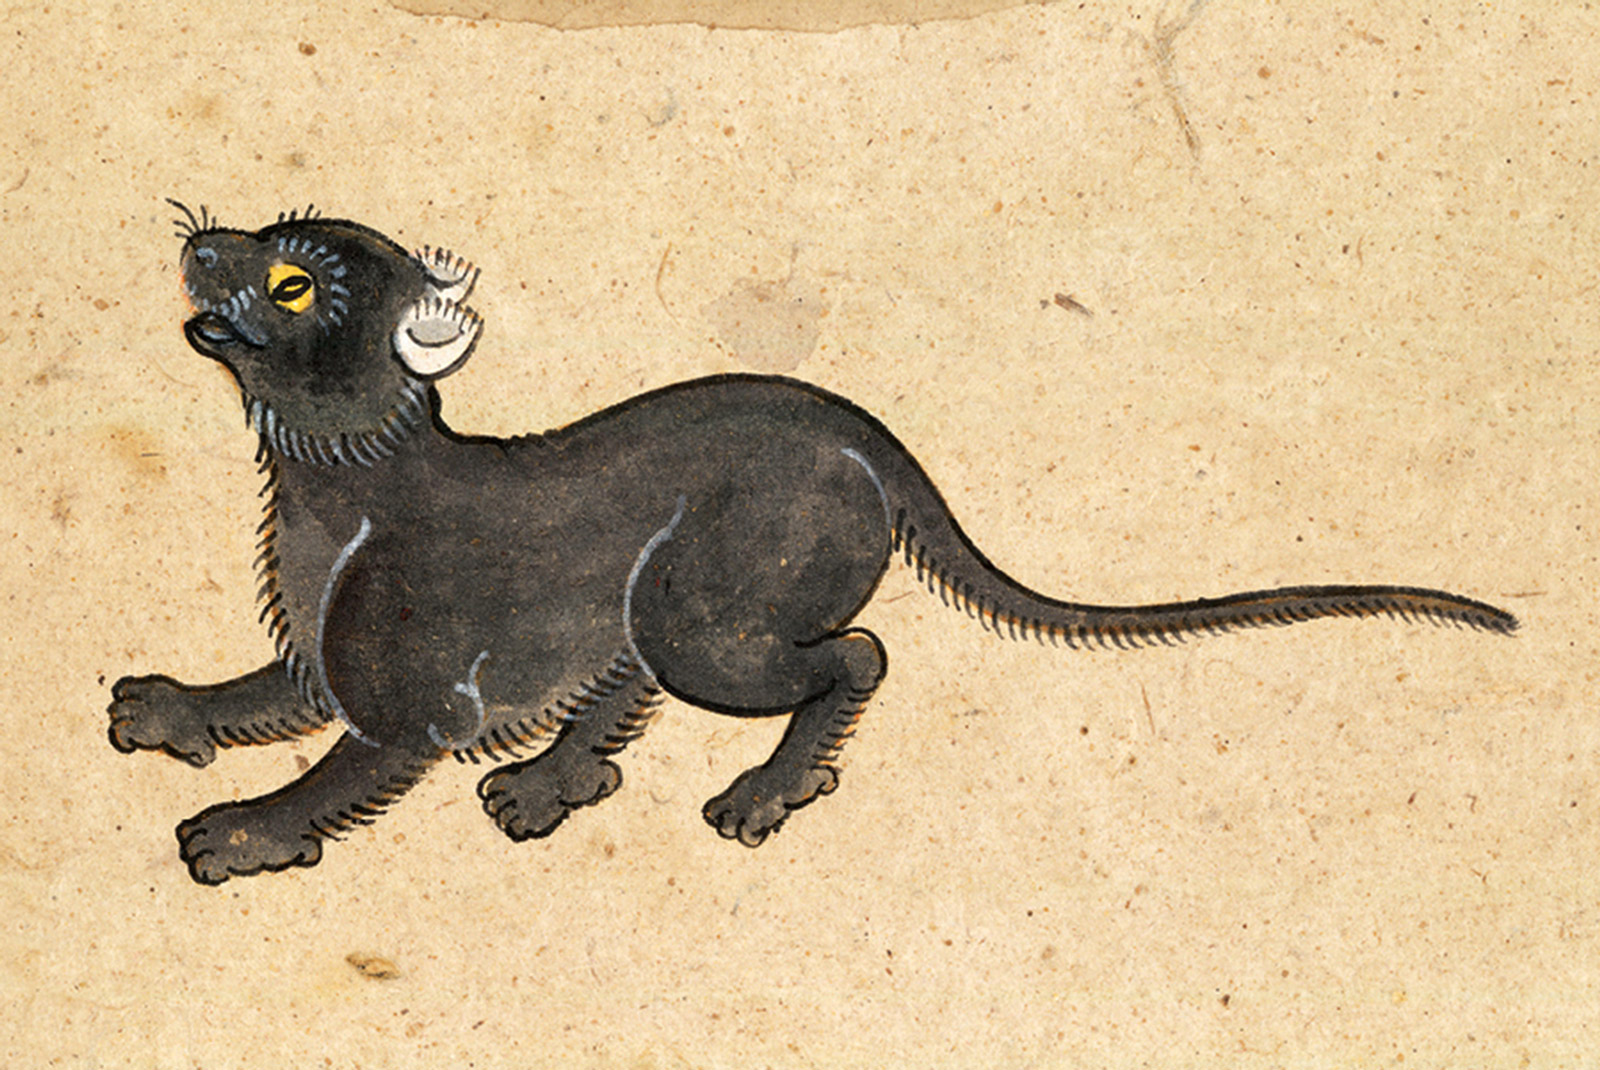 An illustration of a Mulila cat from a mid-nineteenth-century manuscript titled “Tamra Maew.” The accompanying caption reads: “Mulila is one with its name,
Two ears white, as if embroidered.
Eyes like blooming flowers, like the yellow chrysanthemum.
To the tail-tip all black—feet, body, and head.”